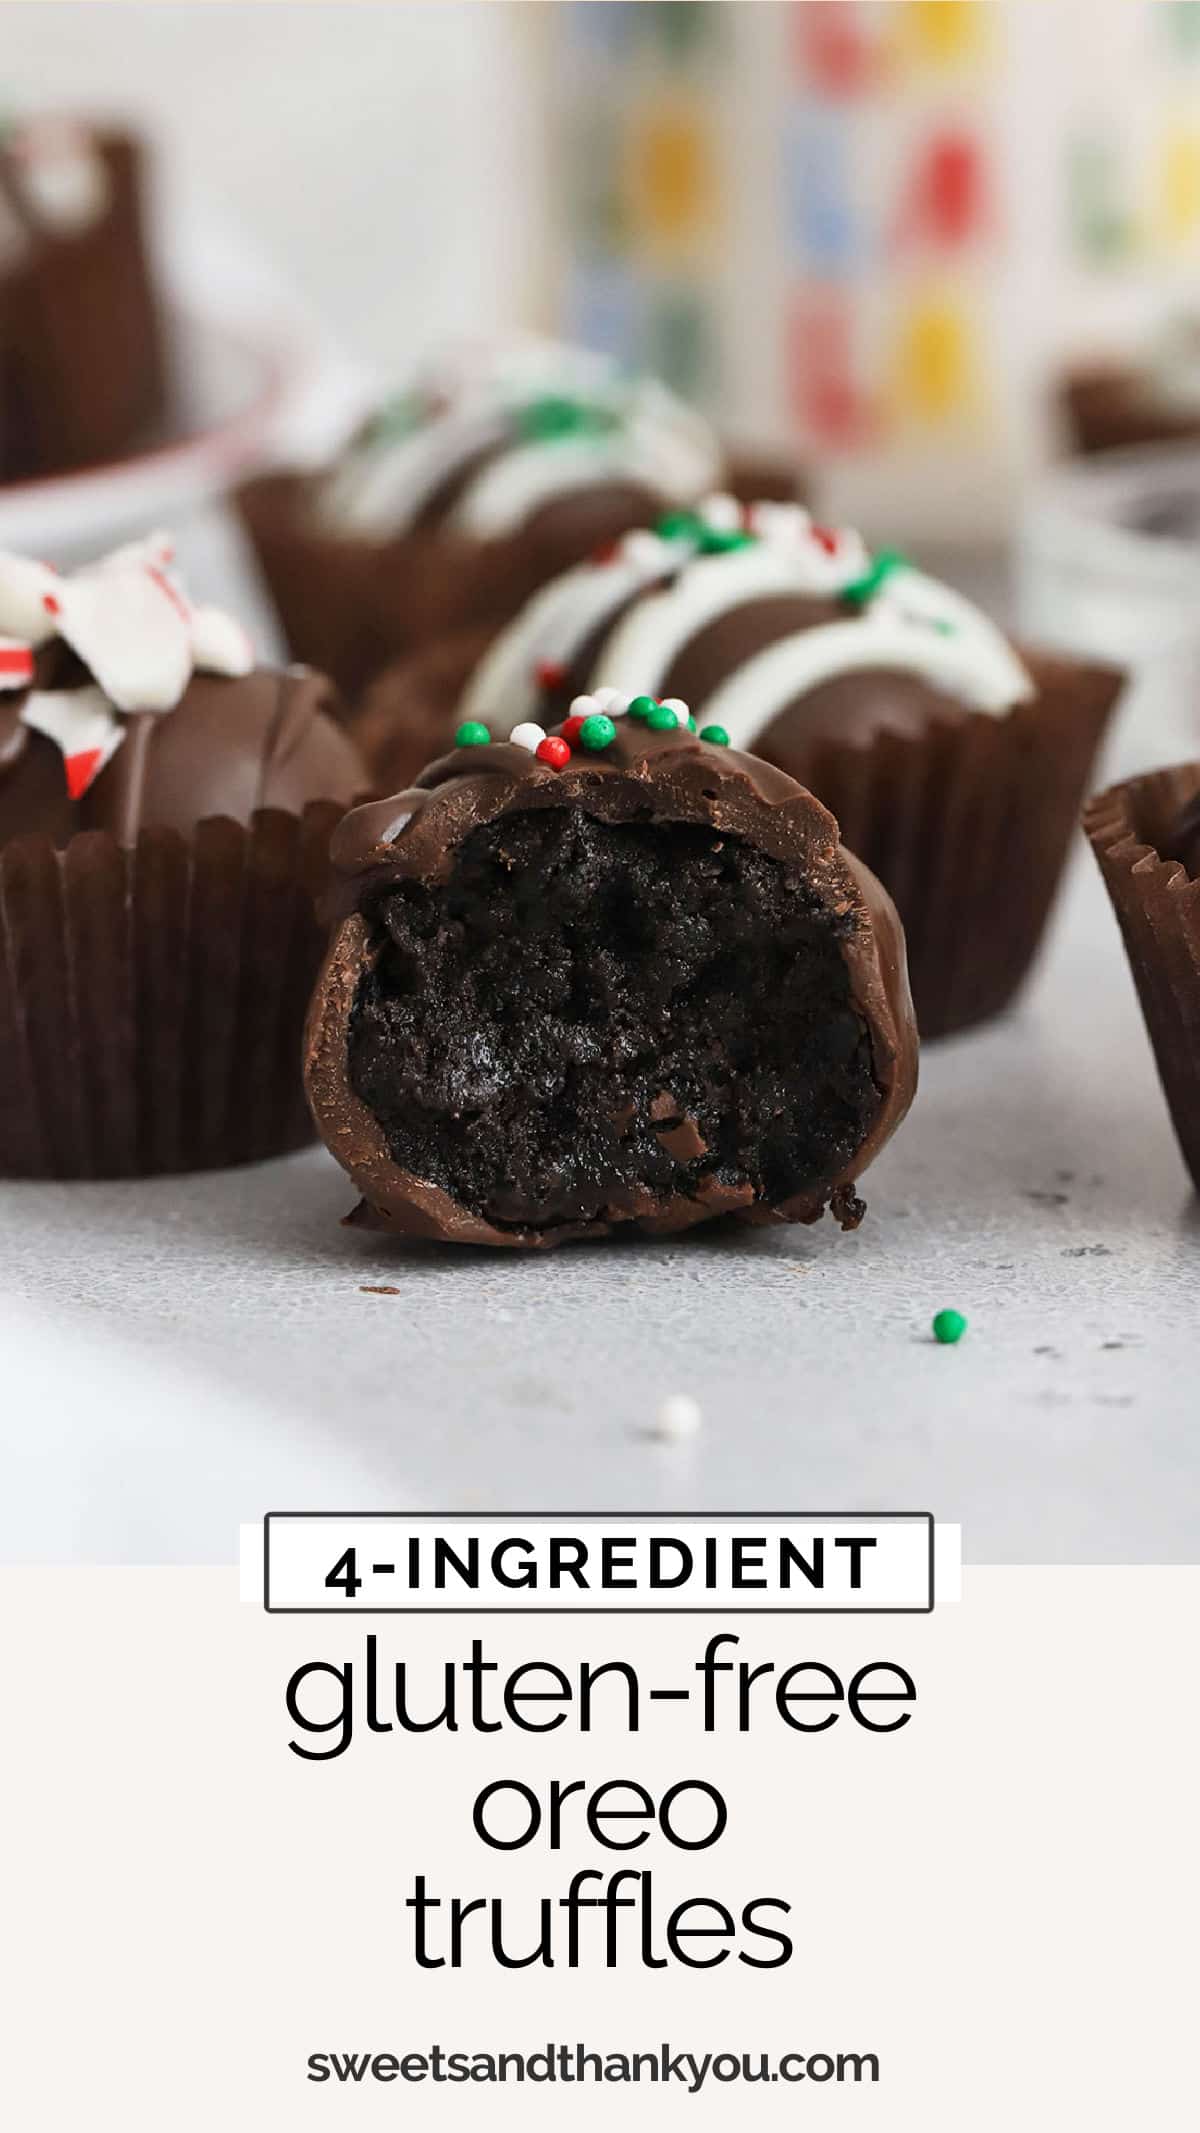 Easy Gluten-Free Oreo Truffles - This gluten-free oreo balls recipe is a perfect holiday treat to share with friends & neighbors. (Don't miss our yummy variations!) // Gluten-Free Peppermint Oreo Truffles // Gluten-free Oreo truffle recipe // gluten-free oreo ball recipe // gluten-free no-bake treat // gluten-free no-bake holiday treats // gluten-free no-bake christmas treats // gluten-free Oreo treats // gluten-free christmas recipe / gluten-free holiday recipe / gluten-free Christmas dessert  